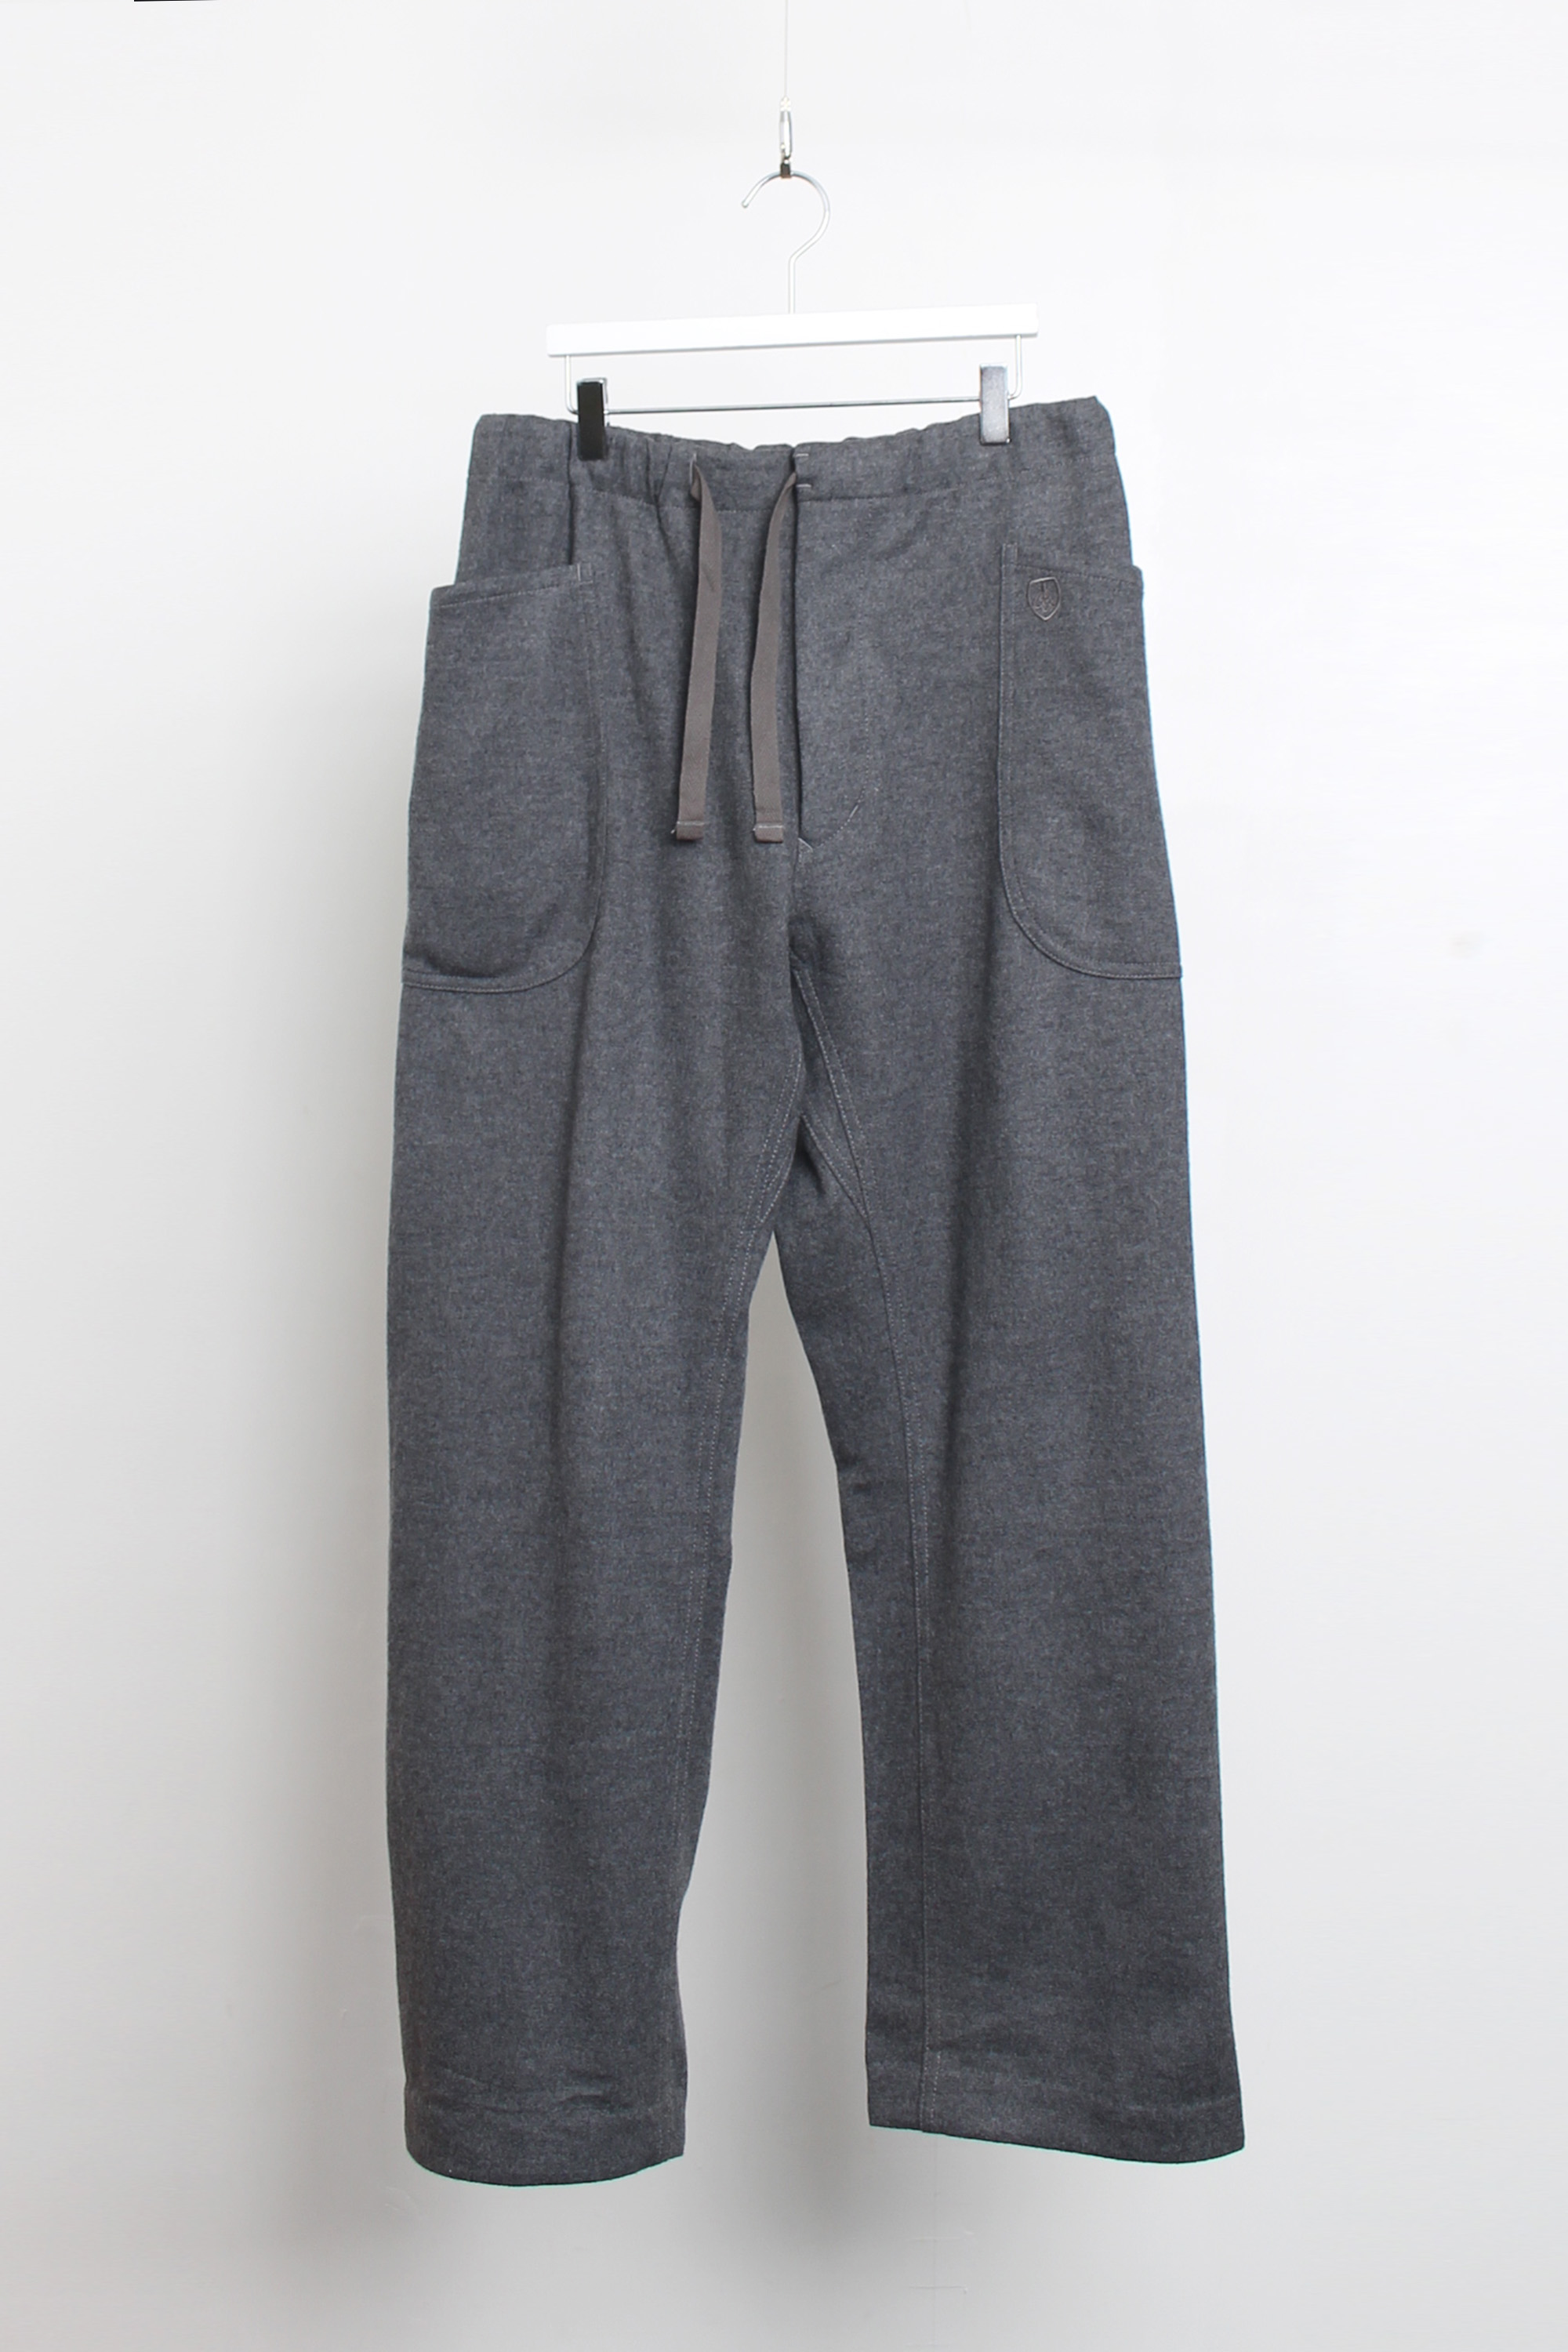 ORCIVAL wool pants